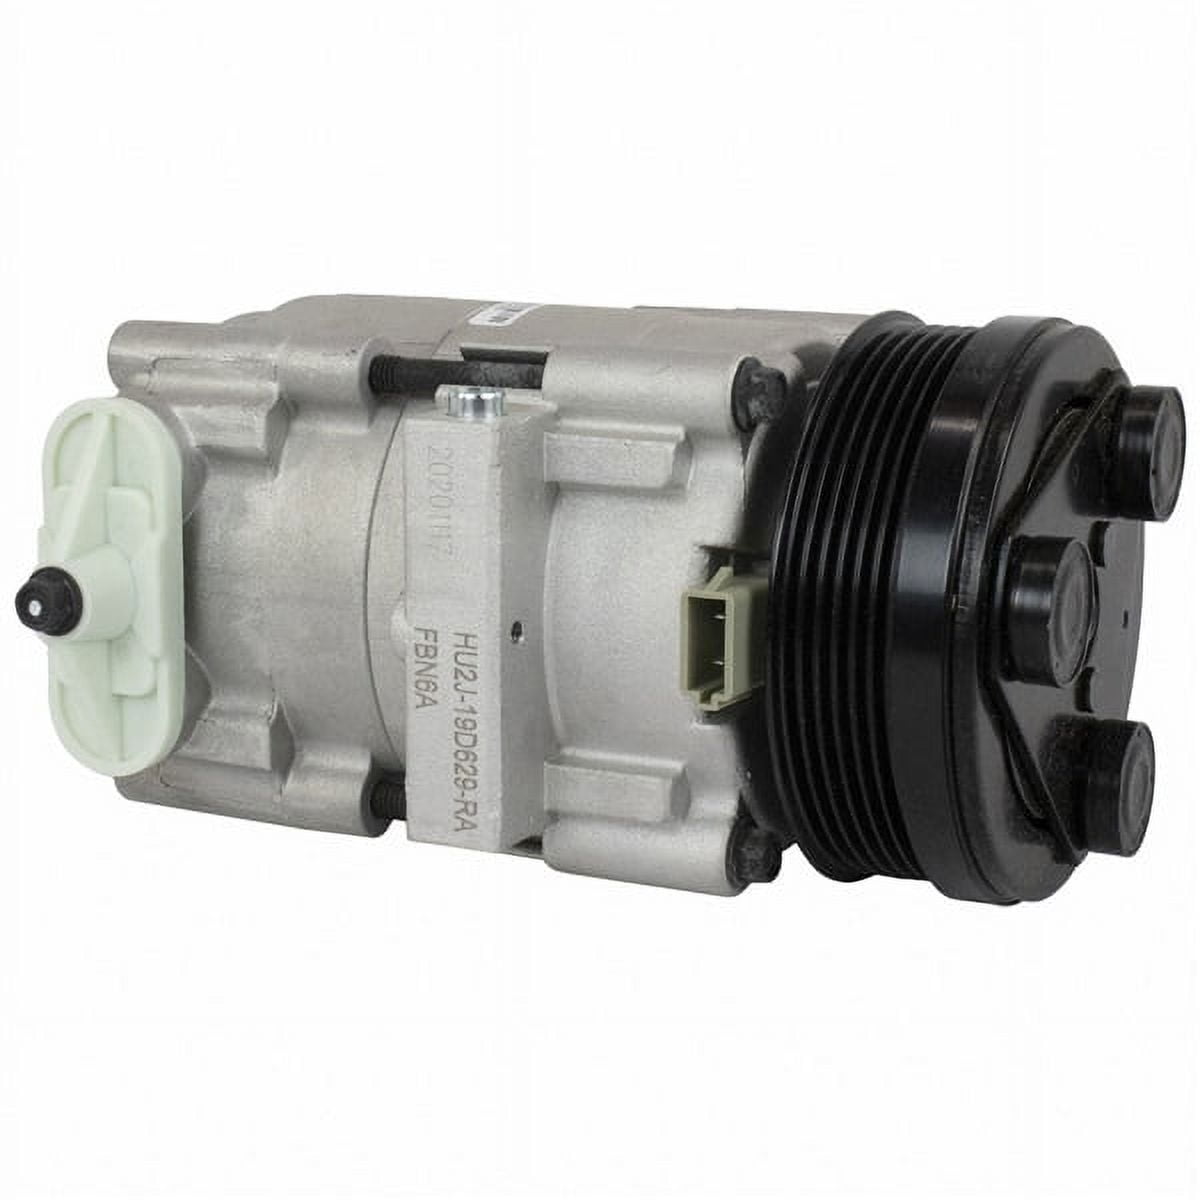 Motorcraft A/C Compressor YCC-495 Fits select: 2004-2005 FORD F150,  1996-2004 FORD MUSTANG